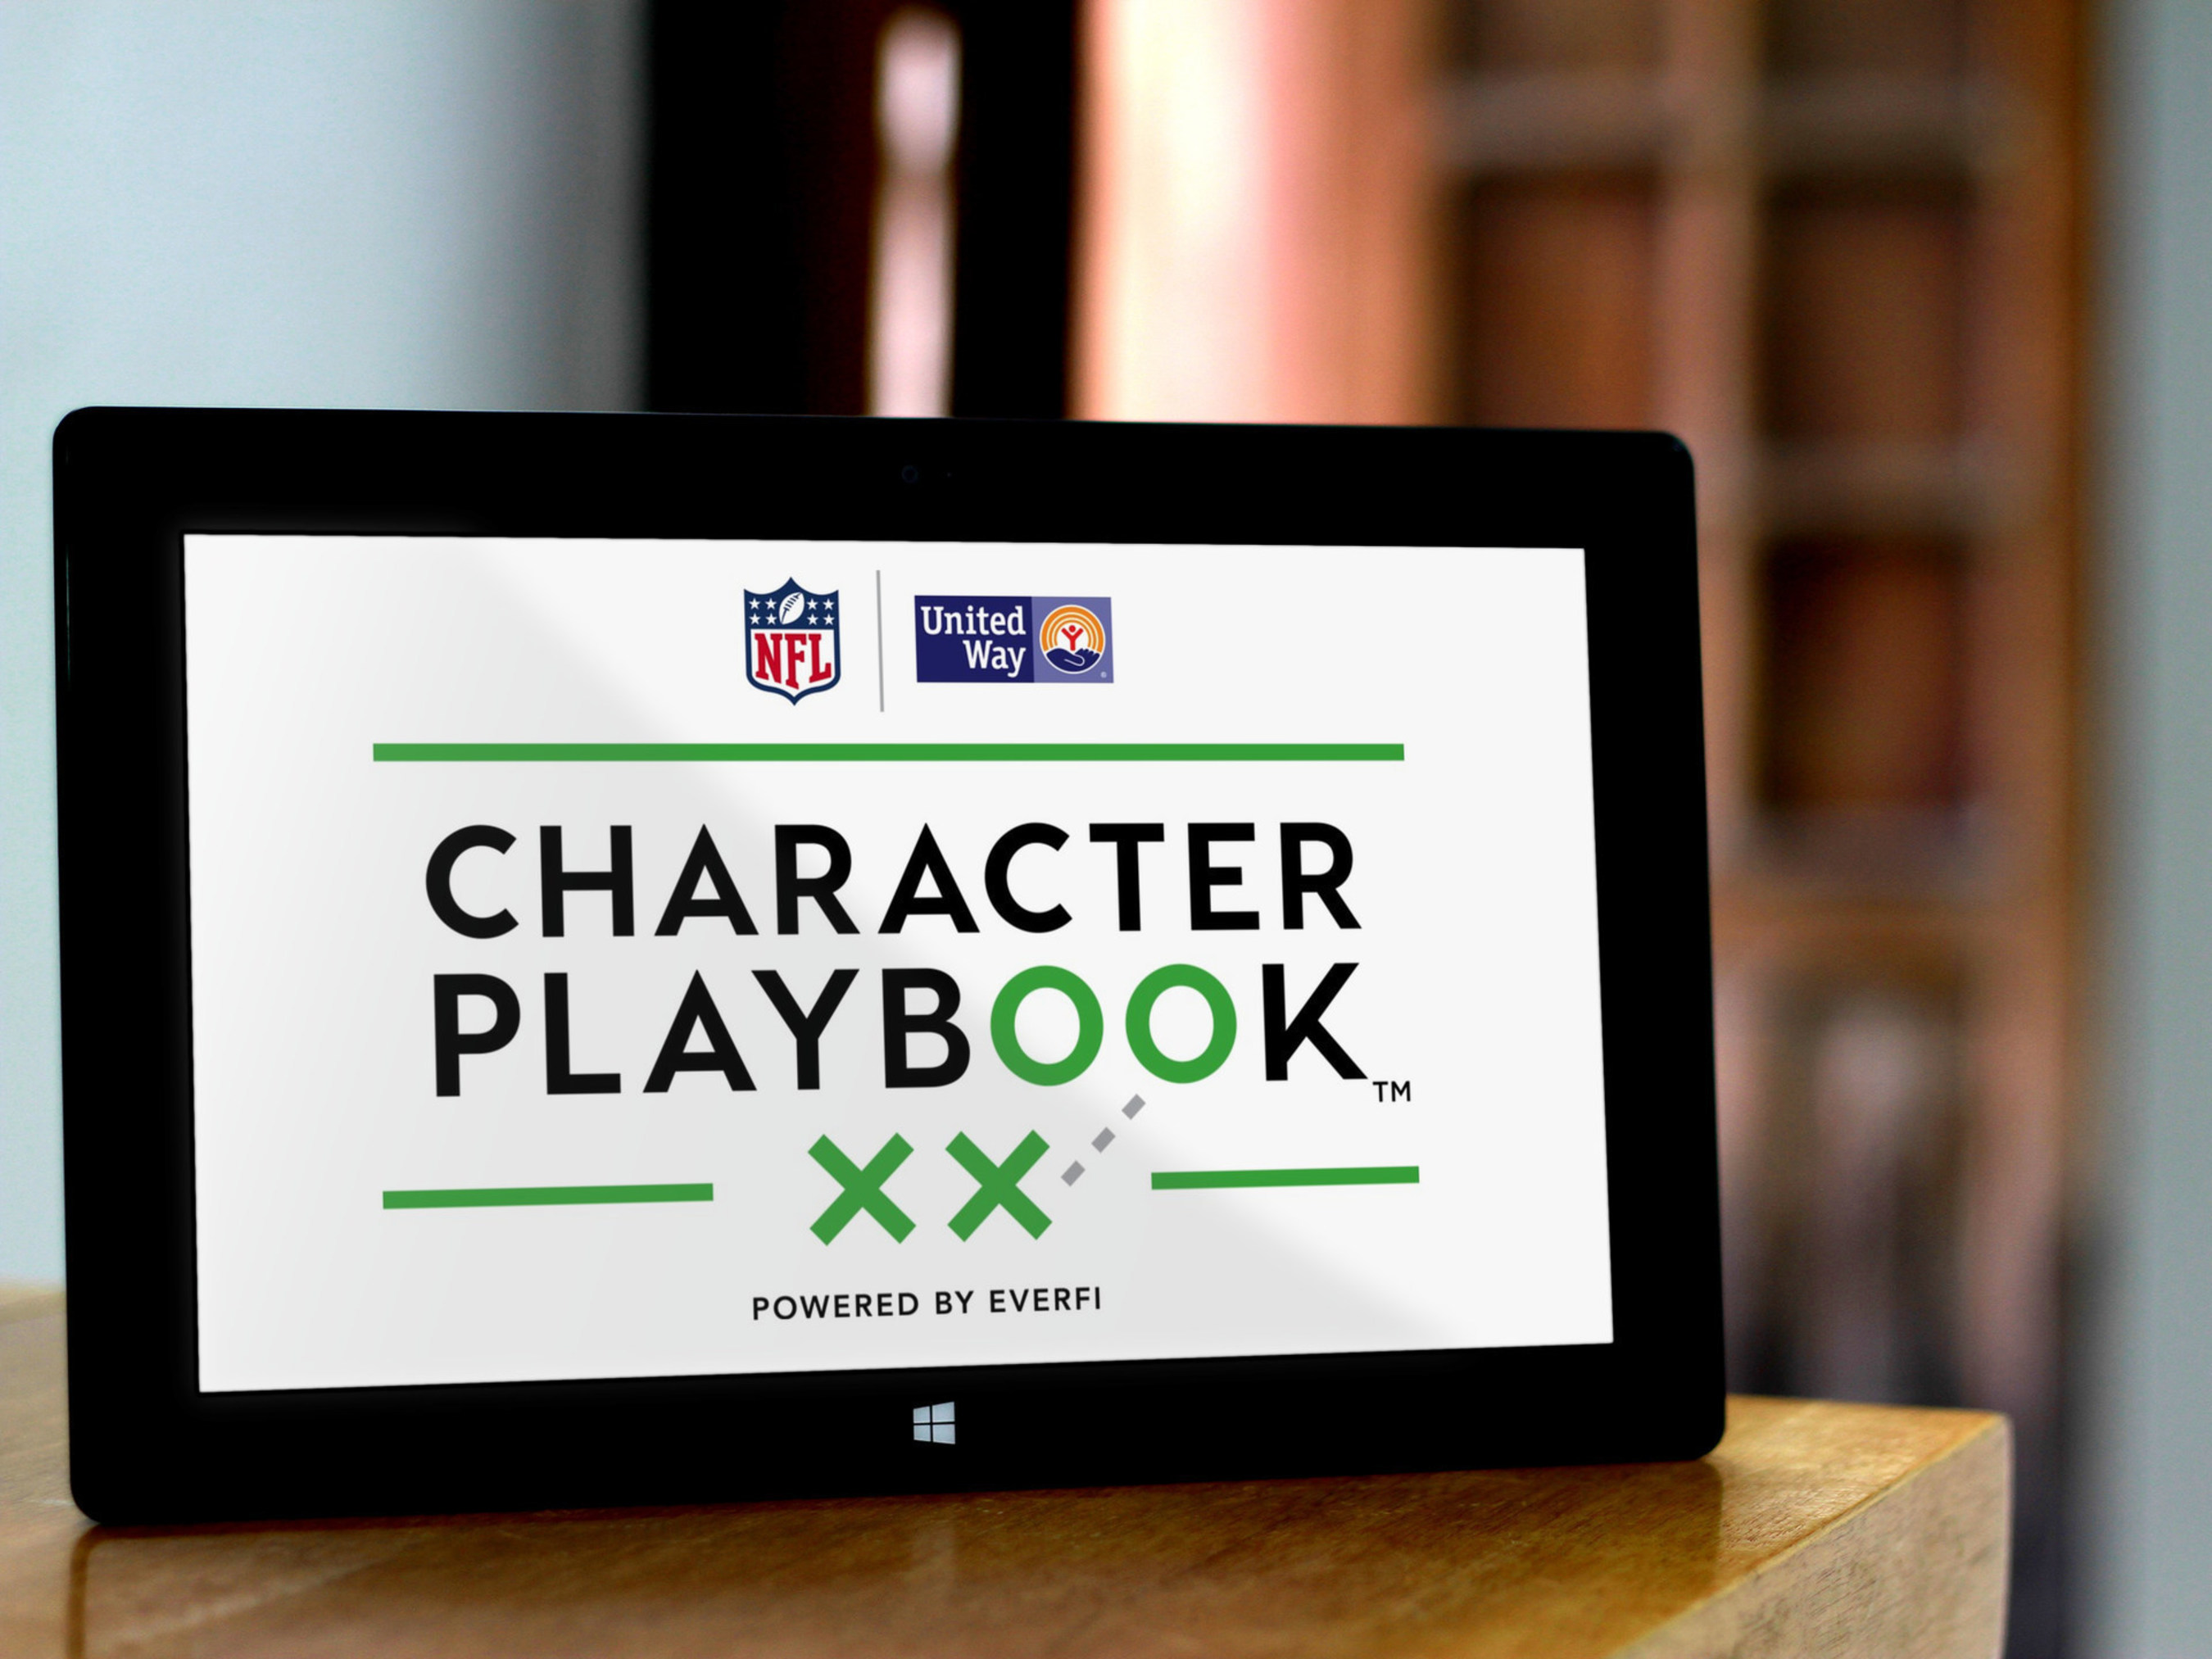 The NFL and United Way Worldwide are proud to launch Character Playbook(TM), a national education initiative focused on youth character development and healthy relationships. The initiative is funded by the NFL Foundation, United Way Worldwide and powered by EverFi, the education technology leader that currently works in more than 13,000 K-12 schools and 800 colleges and universities.